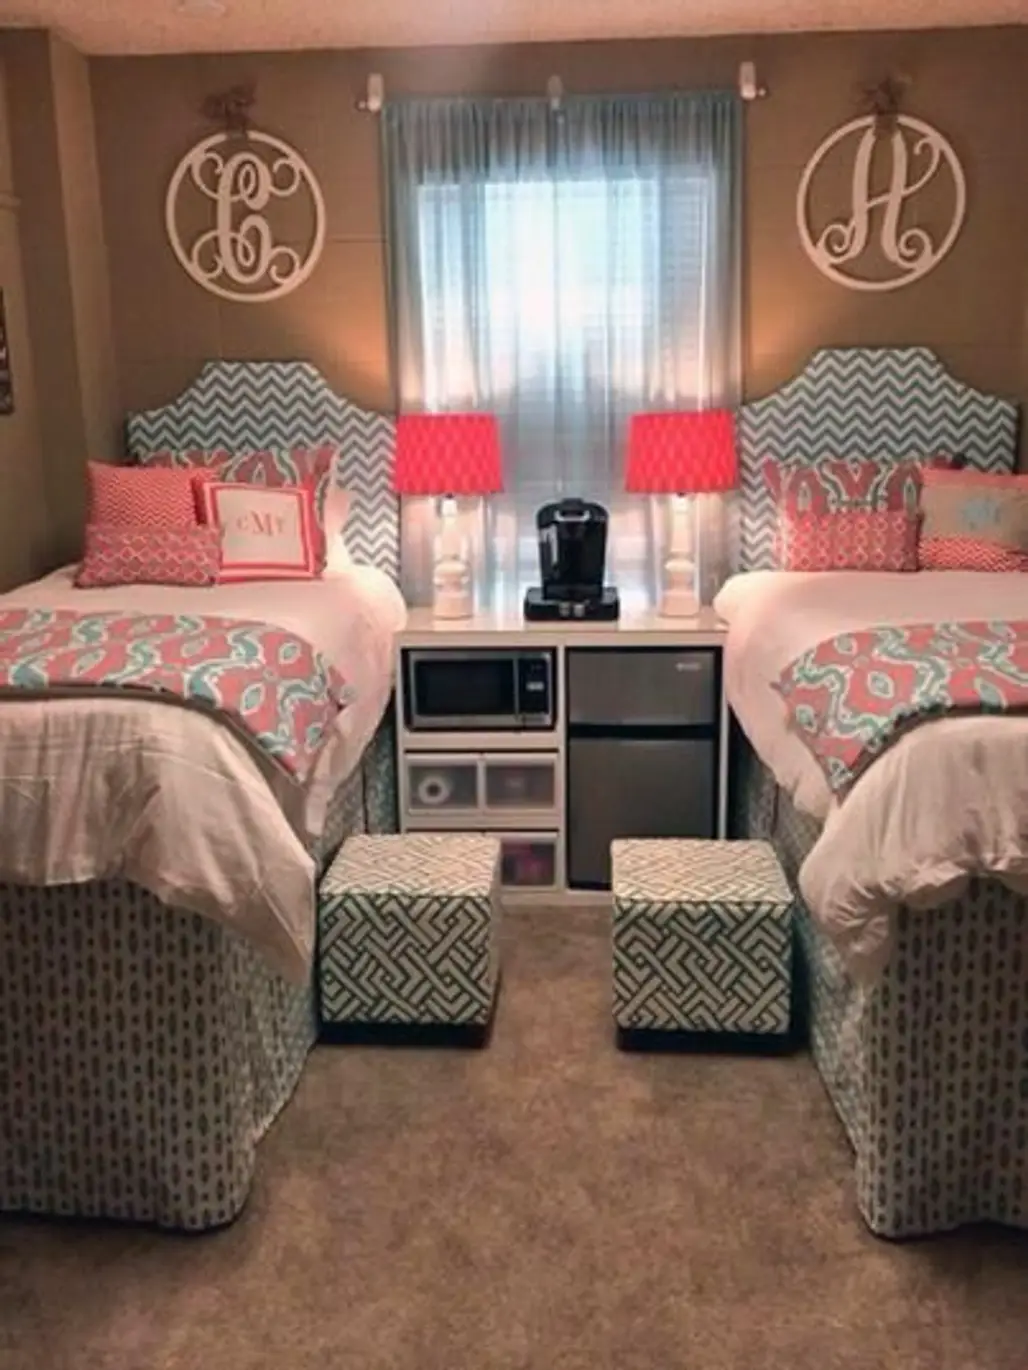 Go Matchy Matchy to Make the Room Feel Homier and Bigger